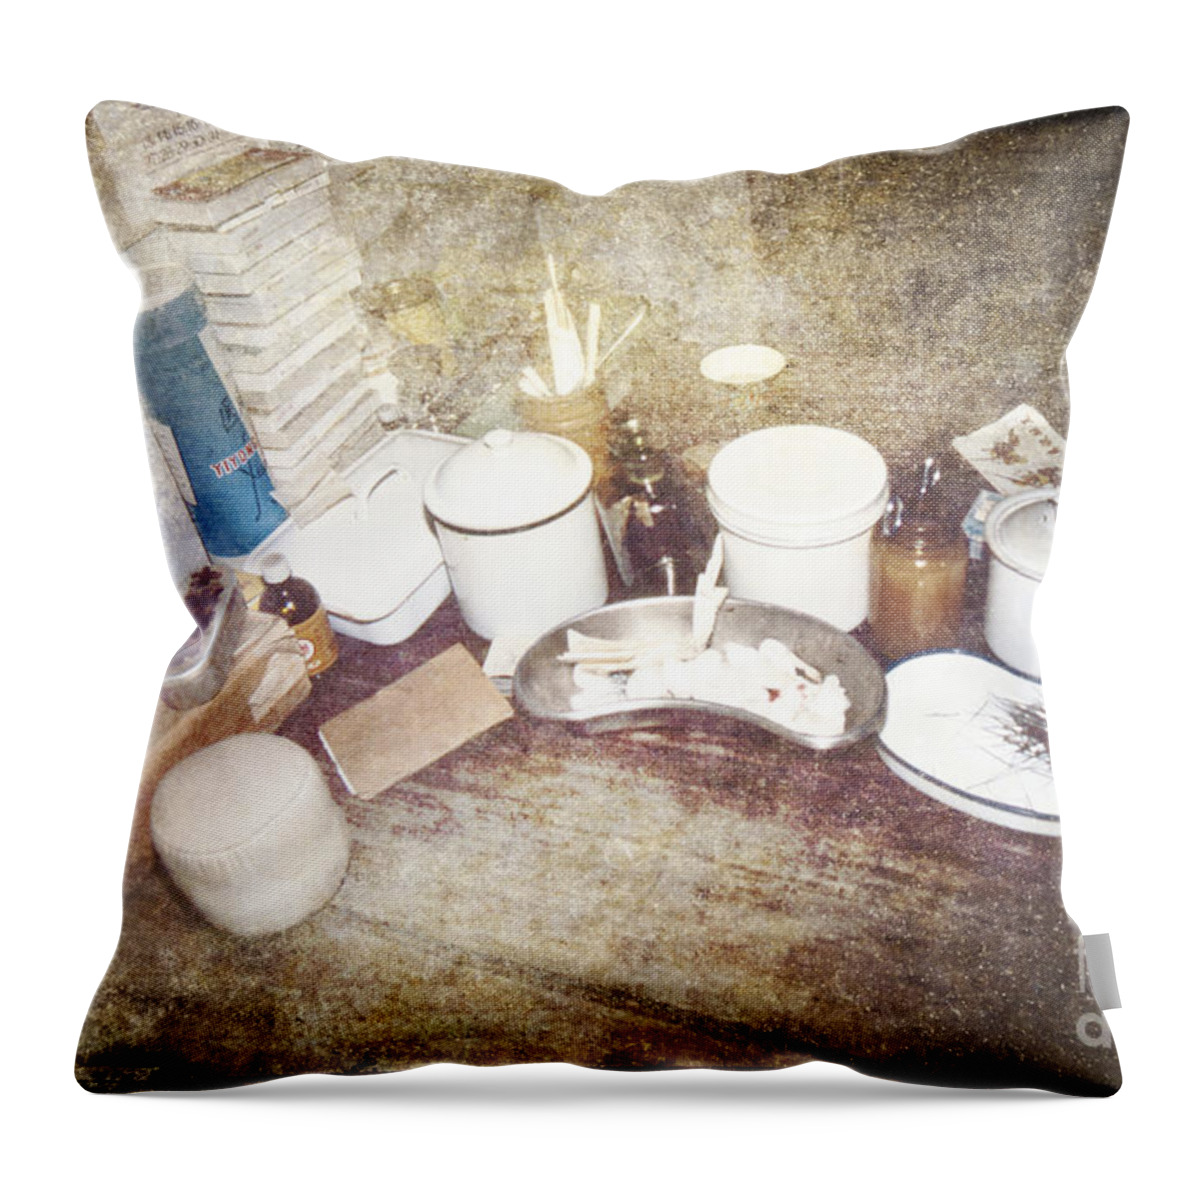 China Throw Pillow featuring the photograph Chinese Doctor's Devices by Heiko Koehrer-Wagner